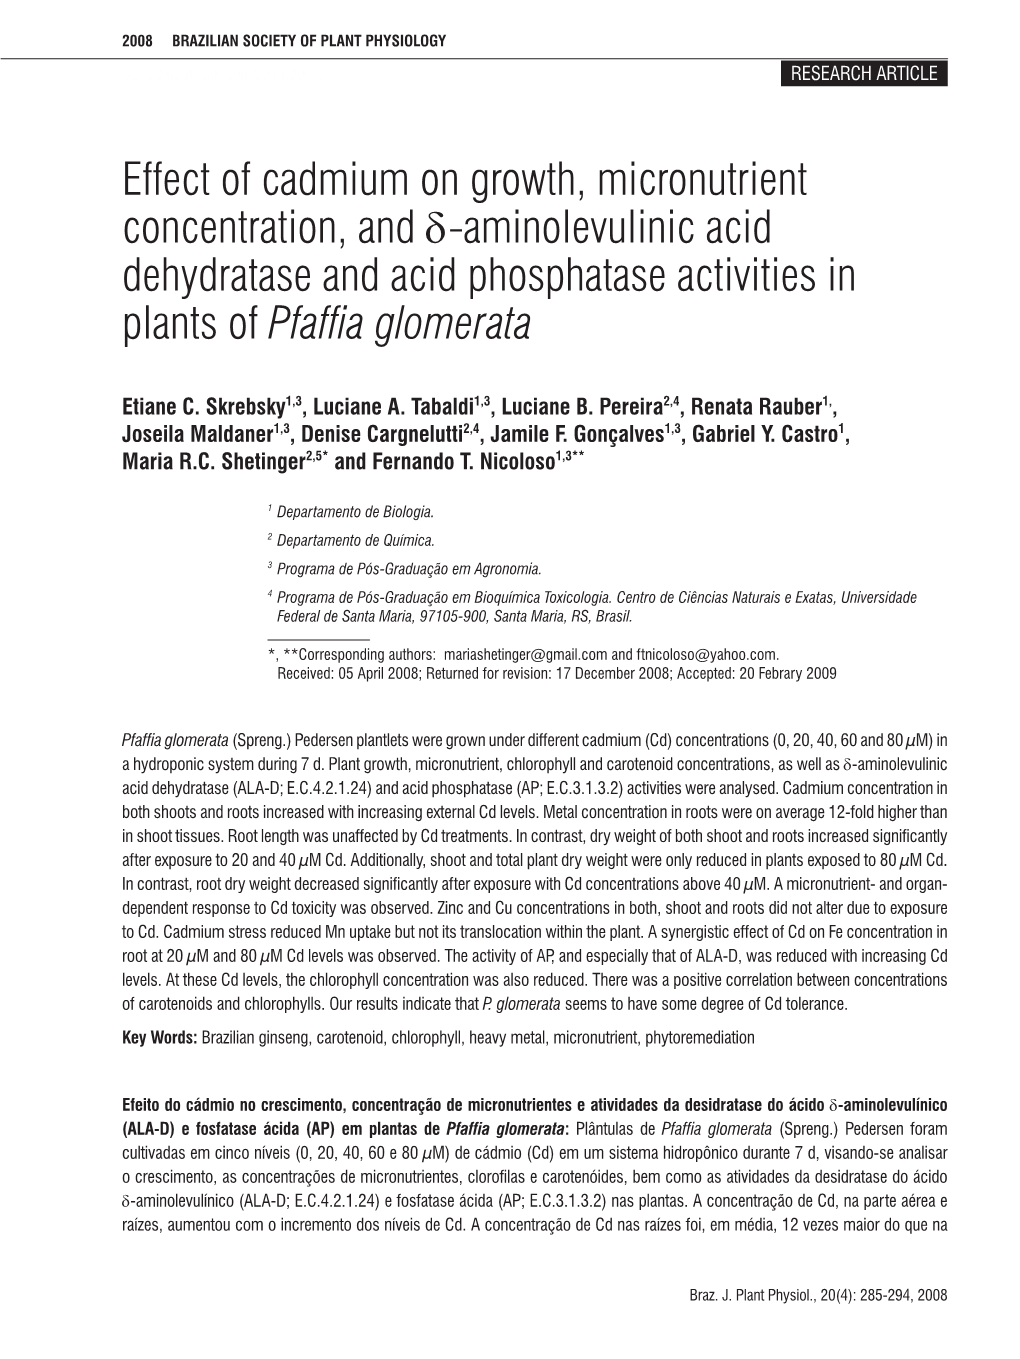 Effect of Cadmium on Growth, Micronutrient Concentration, and Δ-Aminolevulinic Acid Dehydratase and Acid Phosphatase Activities in Plants of Pfaffia Glomerata